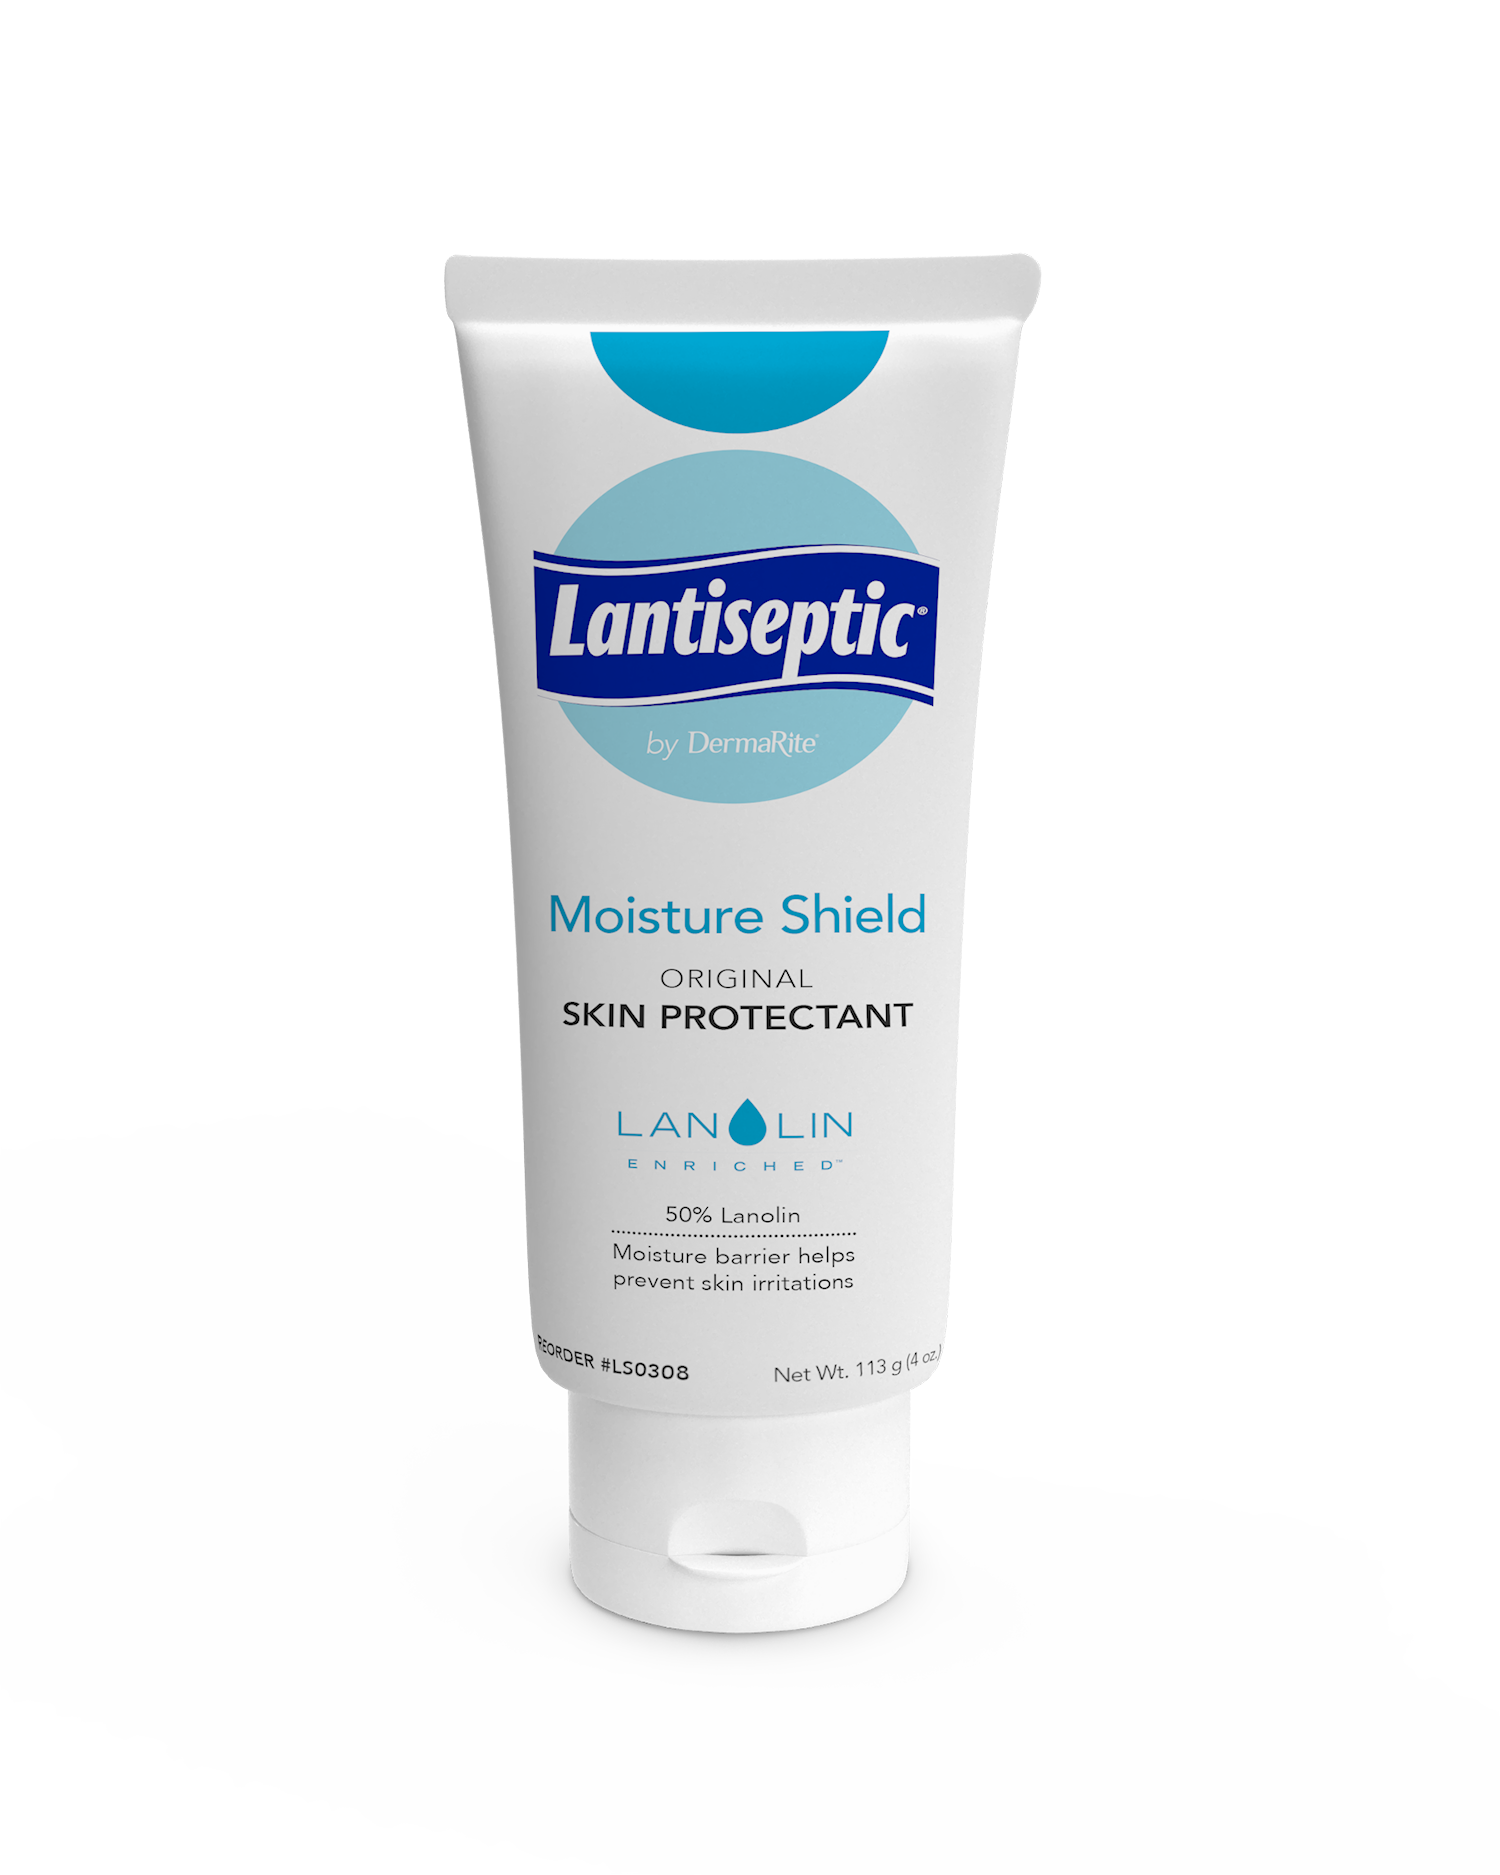 Summit Industries Lantiseptic Skin Protectant Ointment